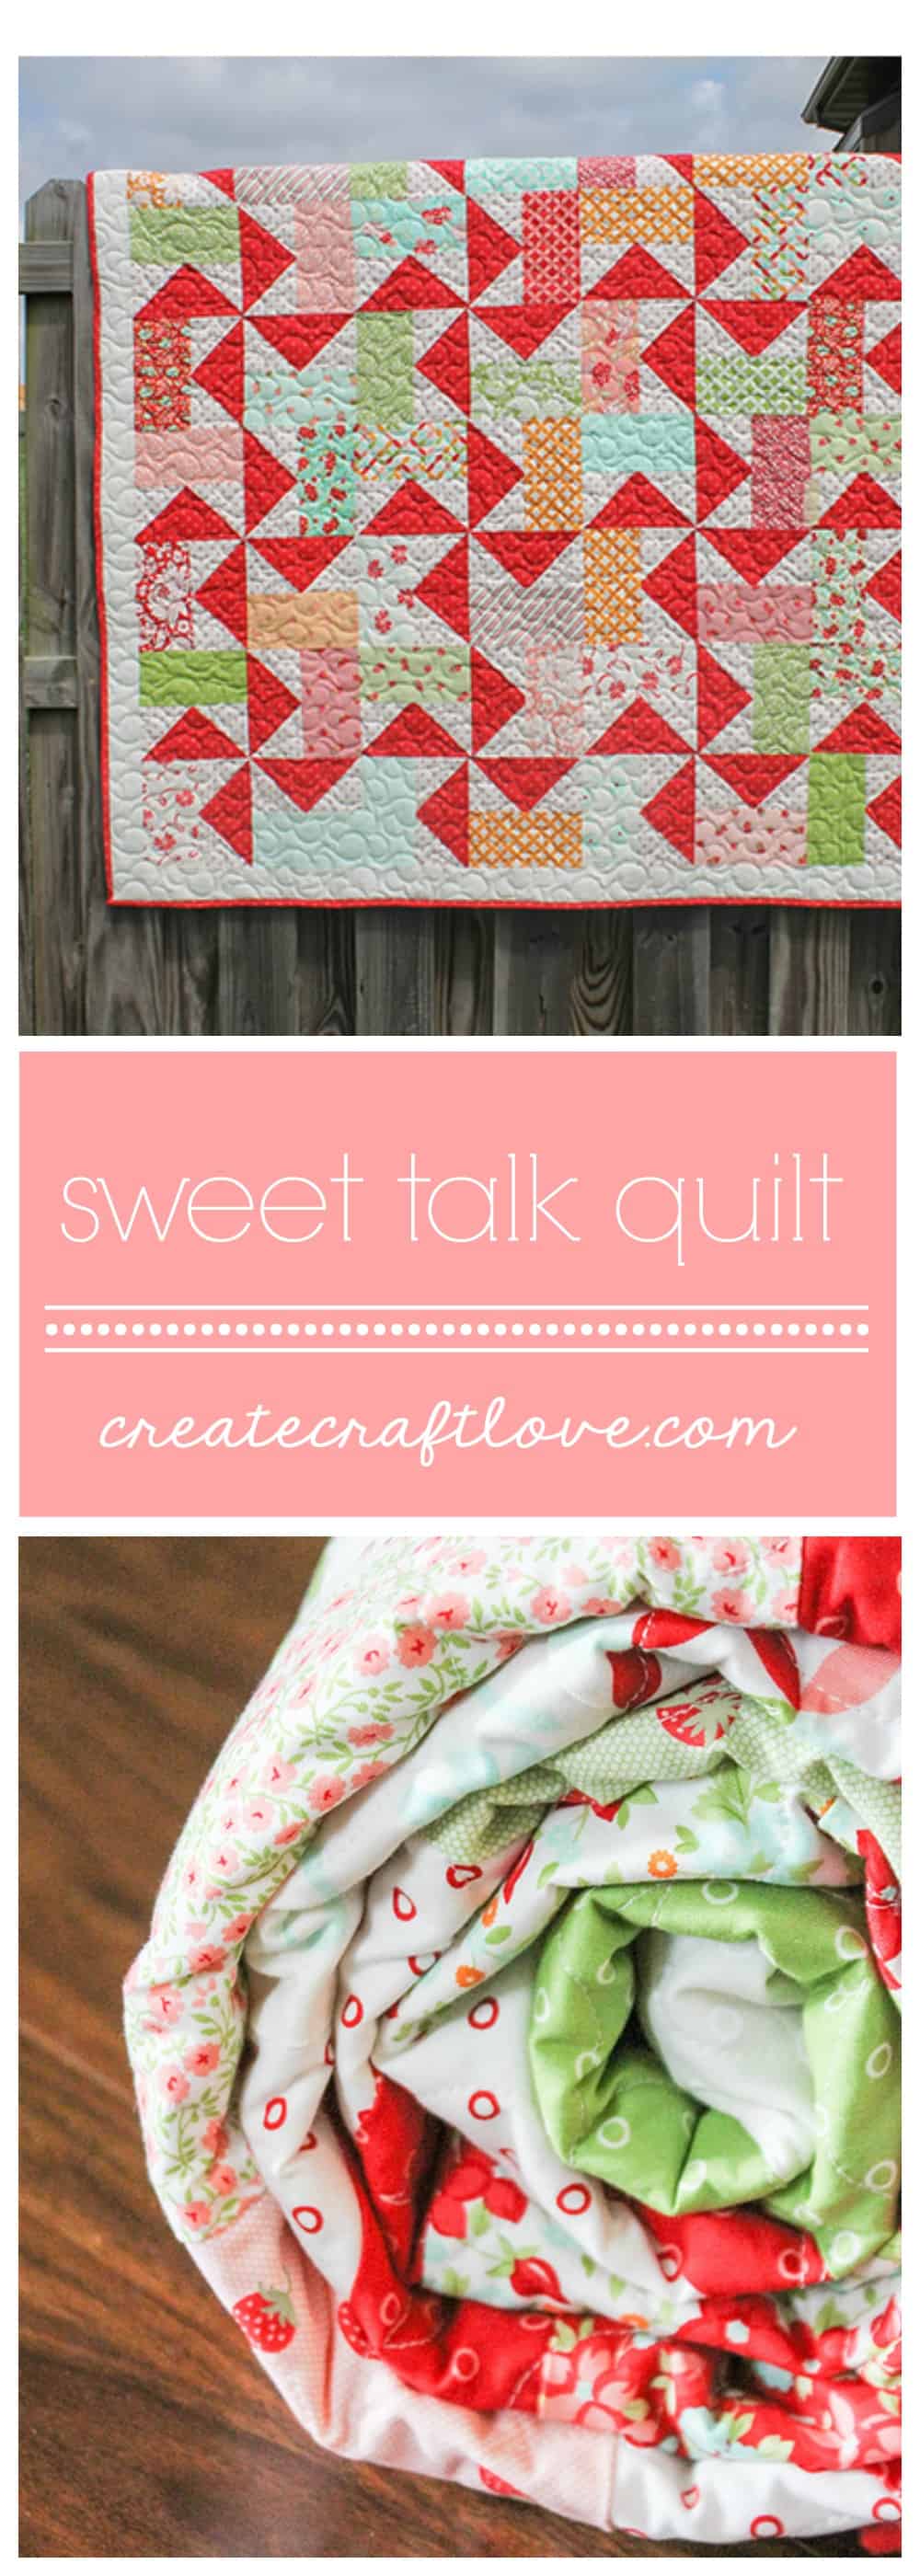 This Sweet Talk Quilt is made up of fun pinwheel blocks and bright colors! via createcraftlove.com